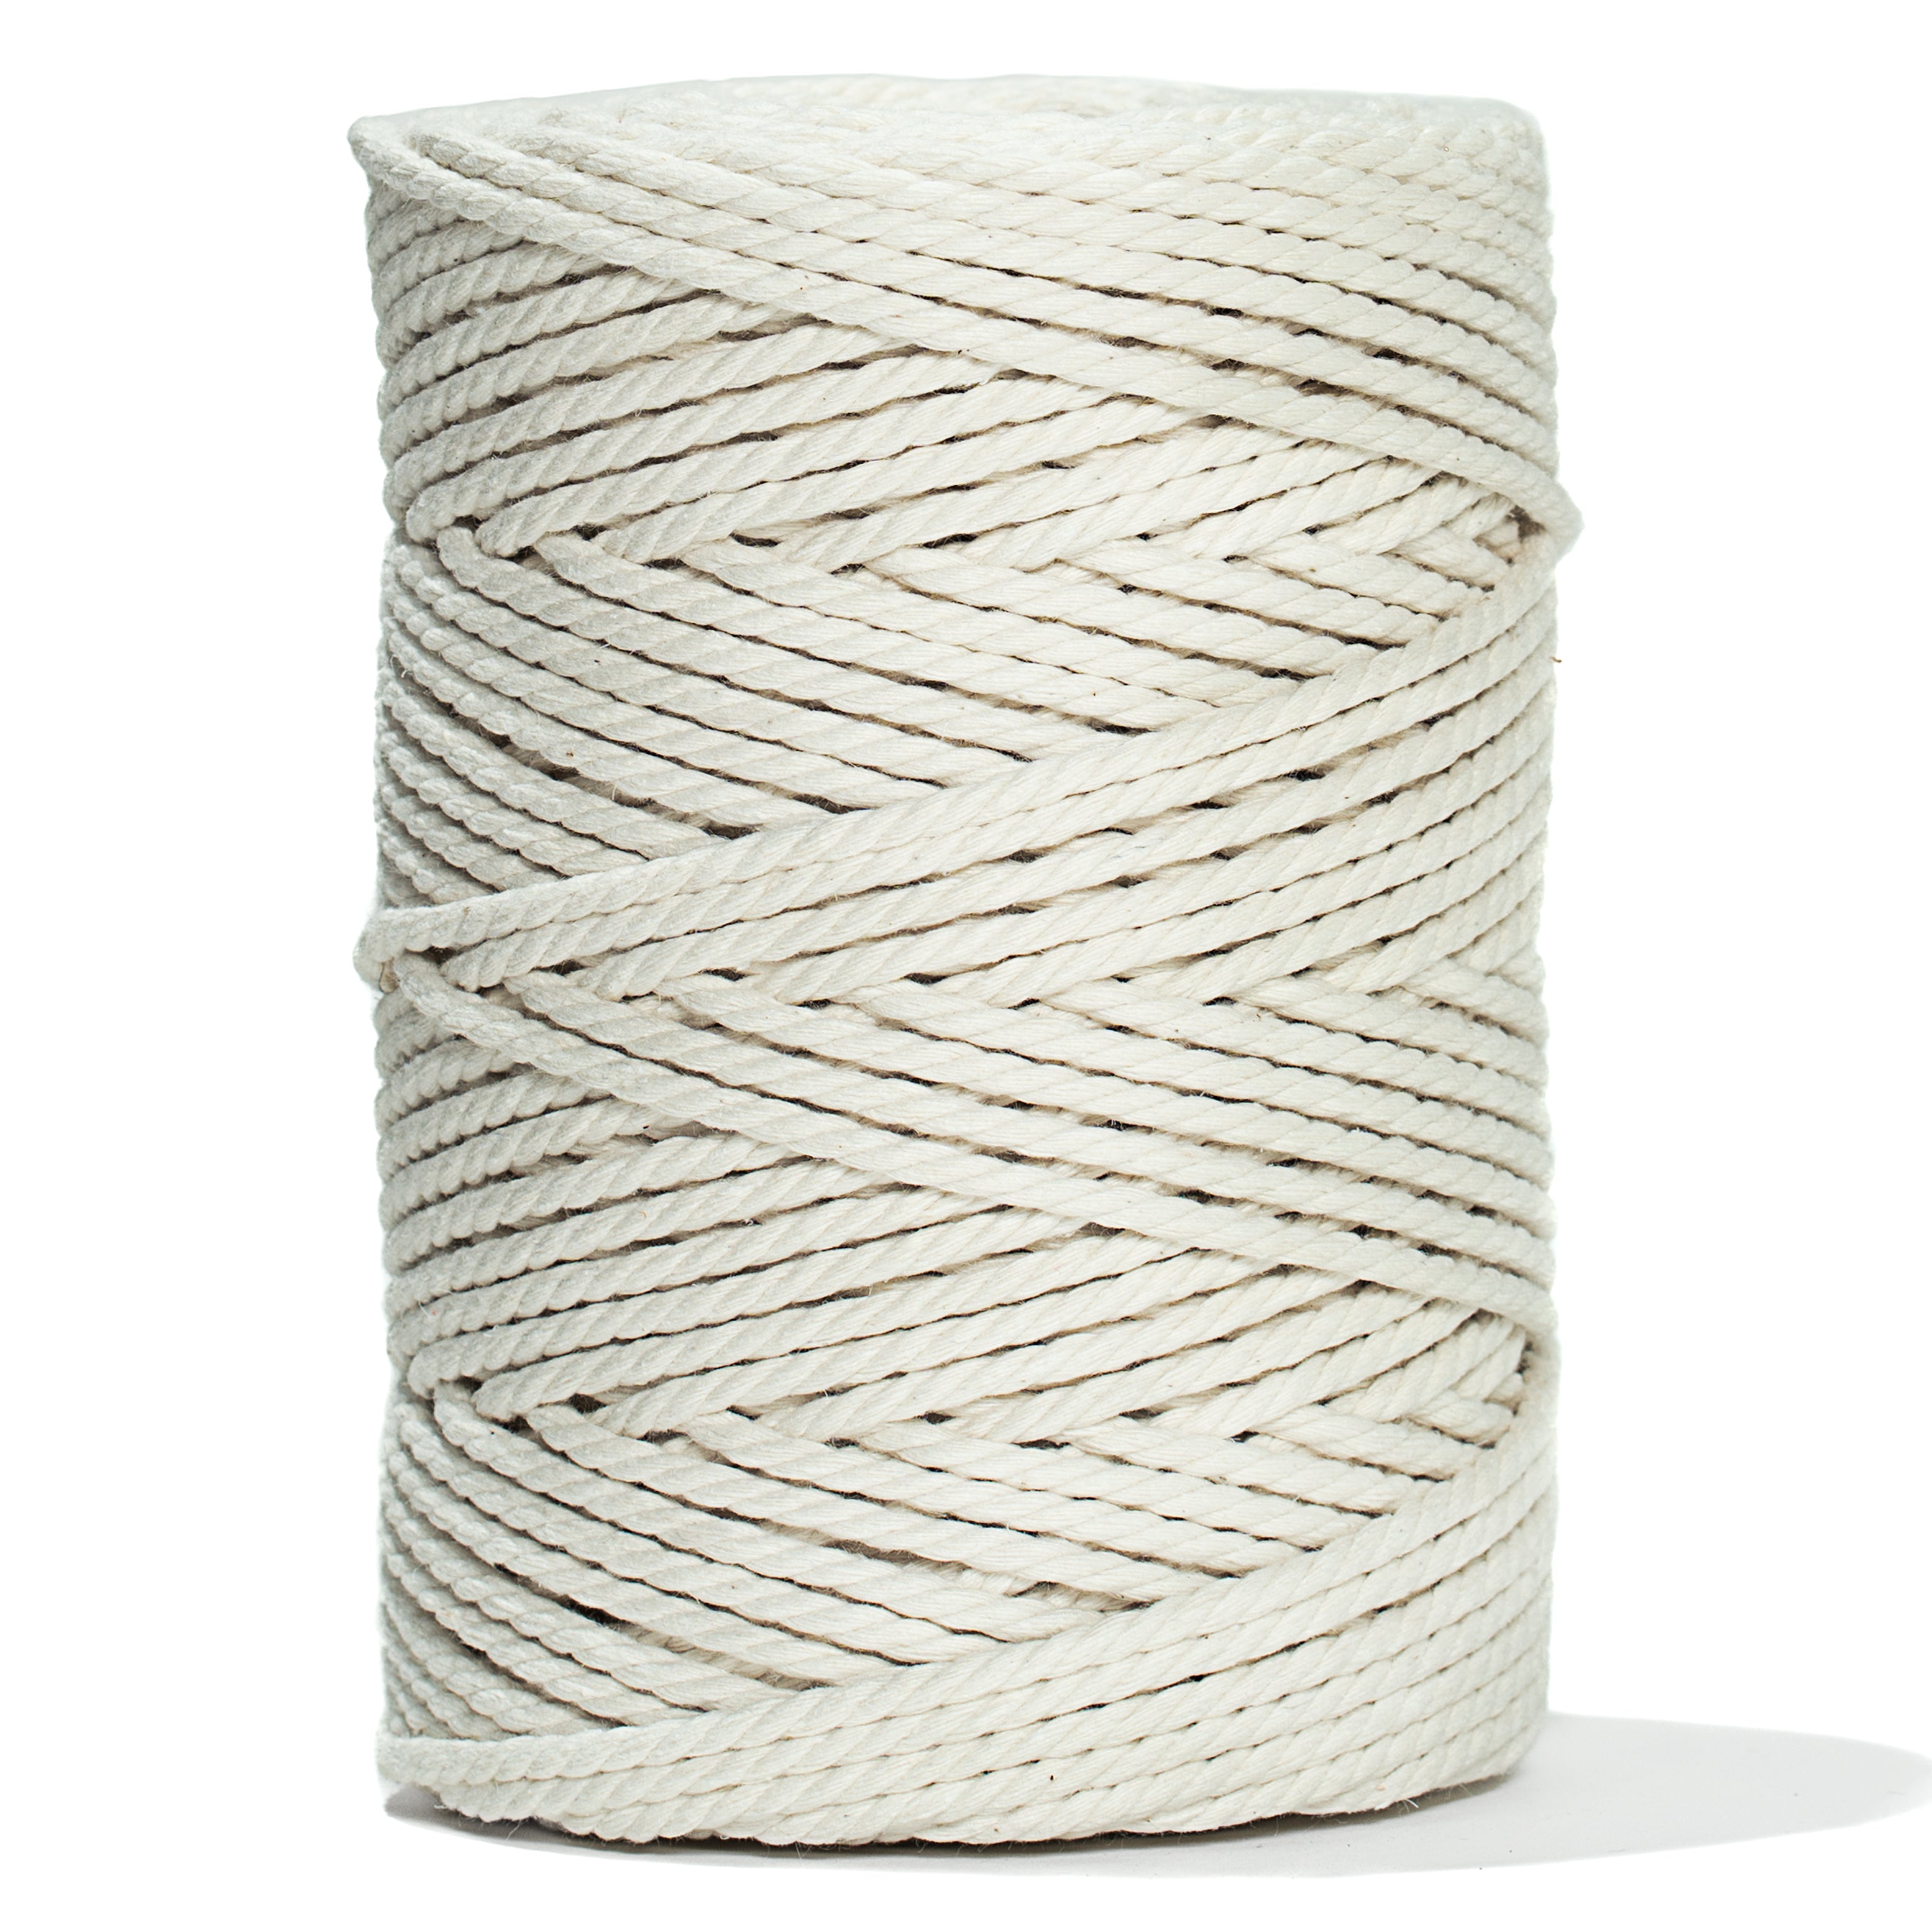 MACRAME COTTON ROPE ZERO WASTE MM - 3 PLY - NATURAL COLOR